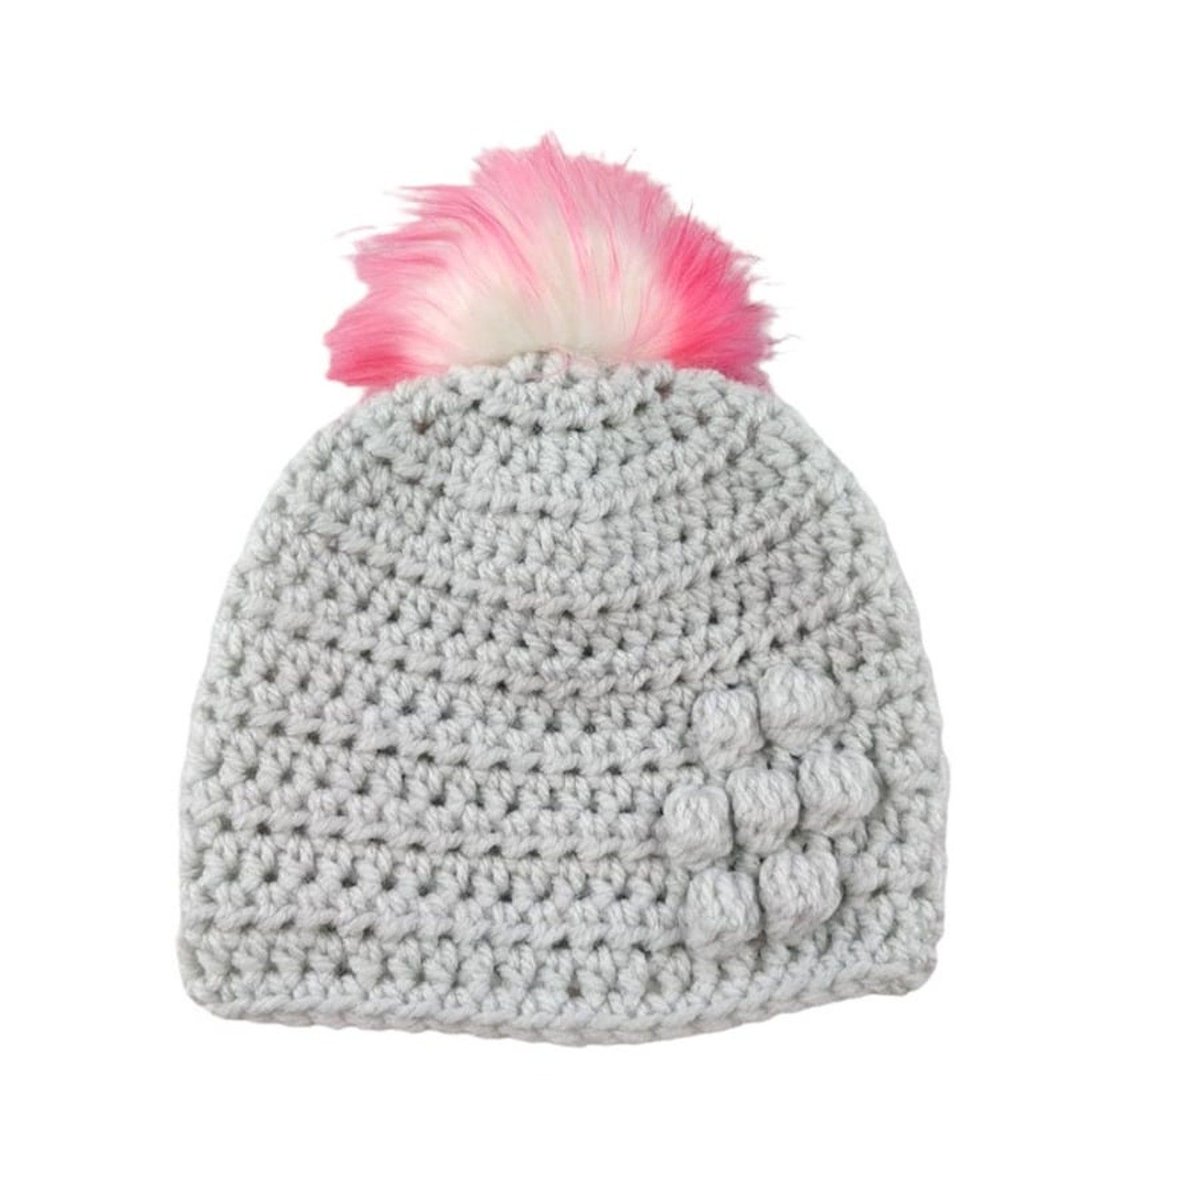 Looking for a unique baby hat? Don't miss this light grey crocheted hat with flower detail. It comes with a detachable white faux fur pompom with cute purple & pink tips. Perfect for your little one. Shop now on #Etsy knittingtopia.etsy.com/listing/168536… #knittingtopia #craftbizparty #MHHSBD